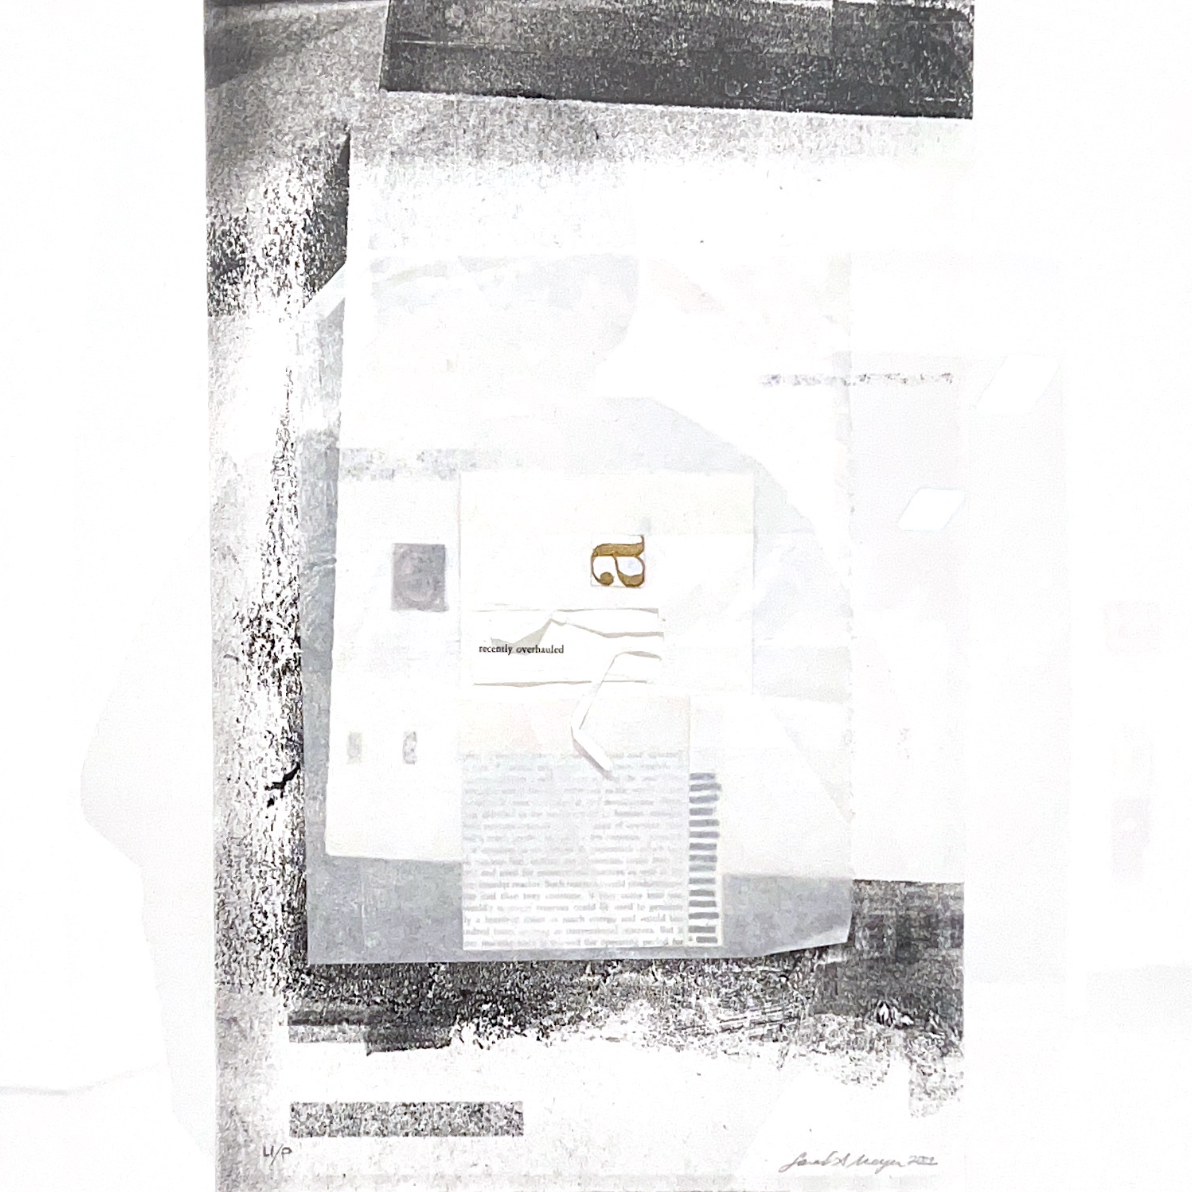 Textus Righted (no. 36) image description: Black and white collage of papers and text